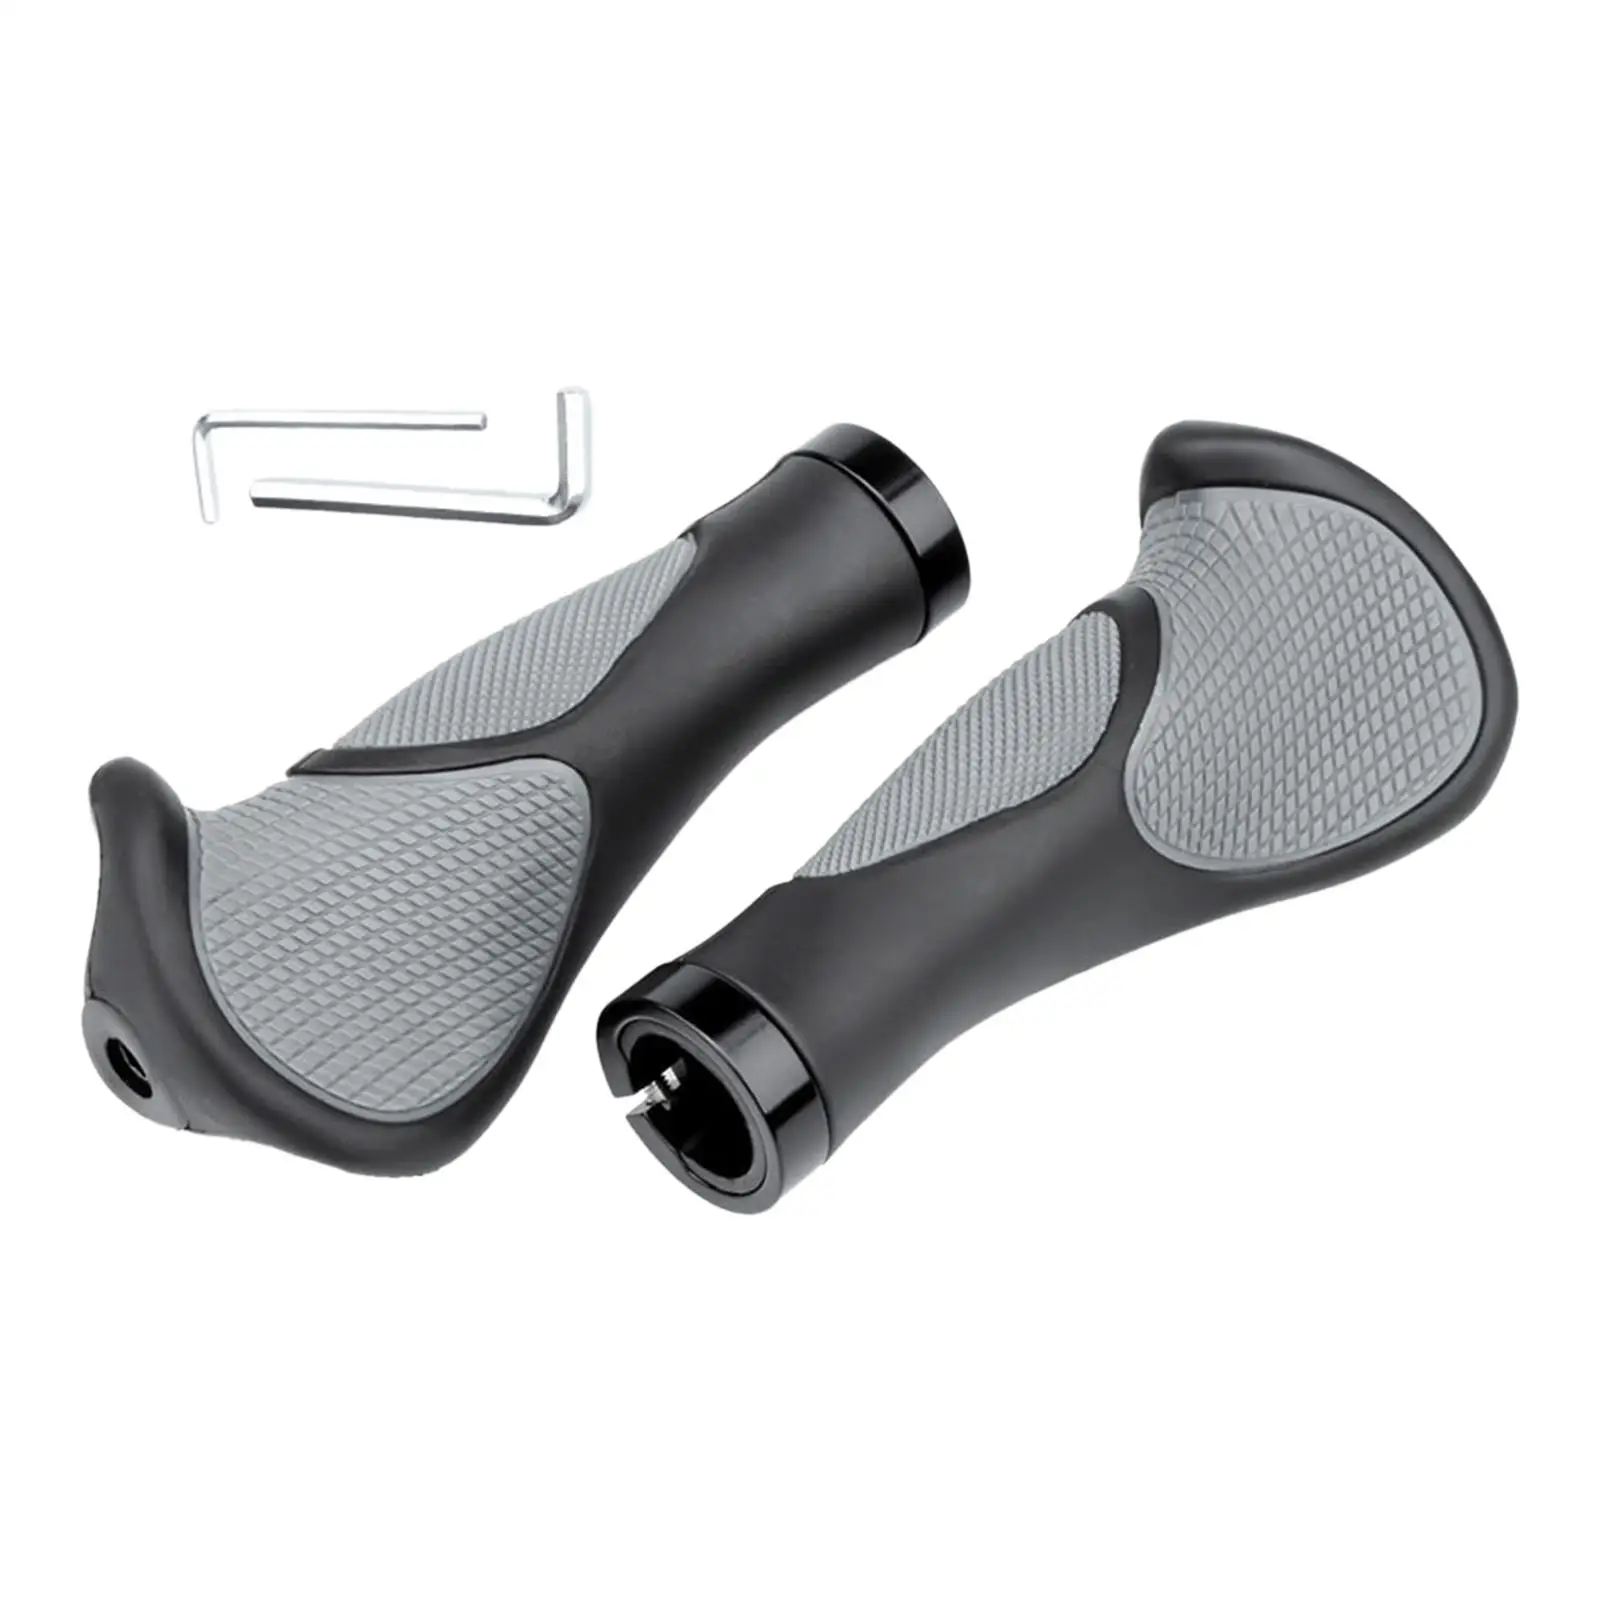 2 Pieces Bicycle Handle Bar Grips Bicycle Grips Shock Resistance for 22.2mm Handlebar